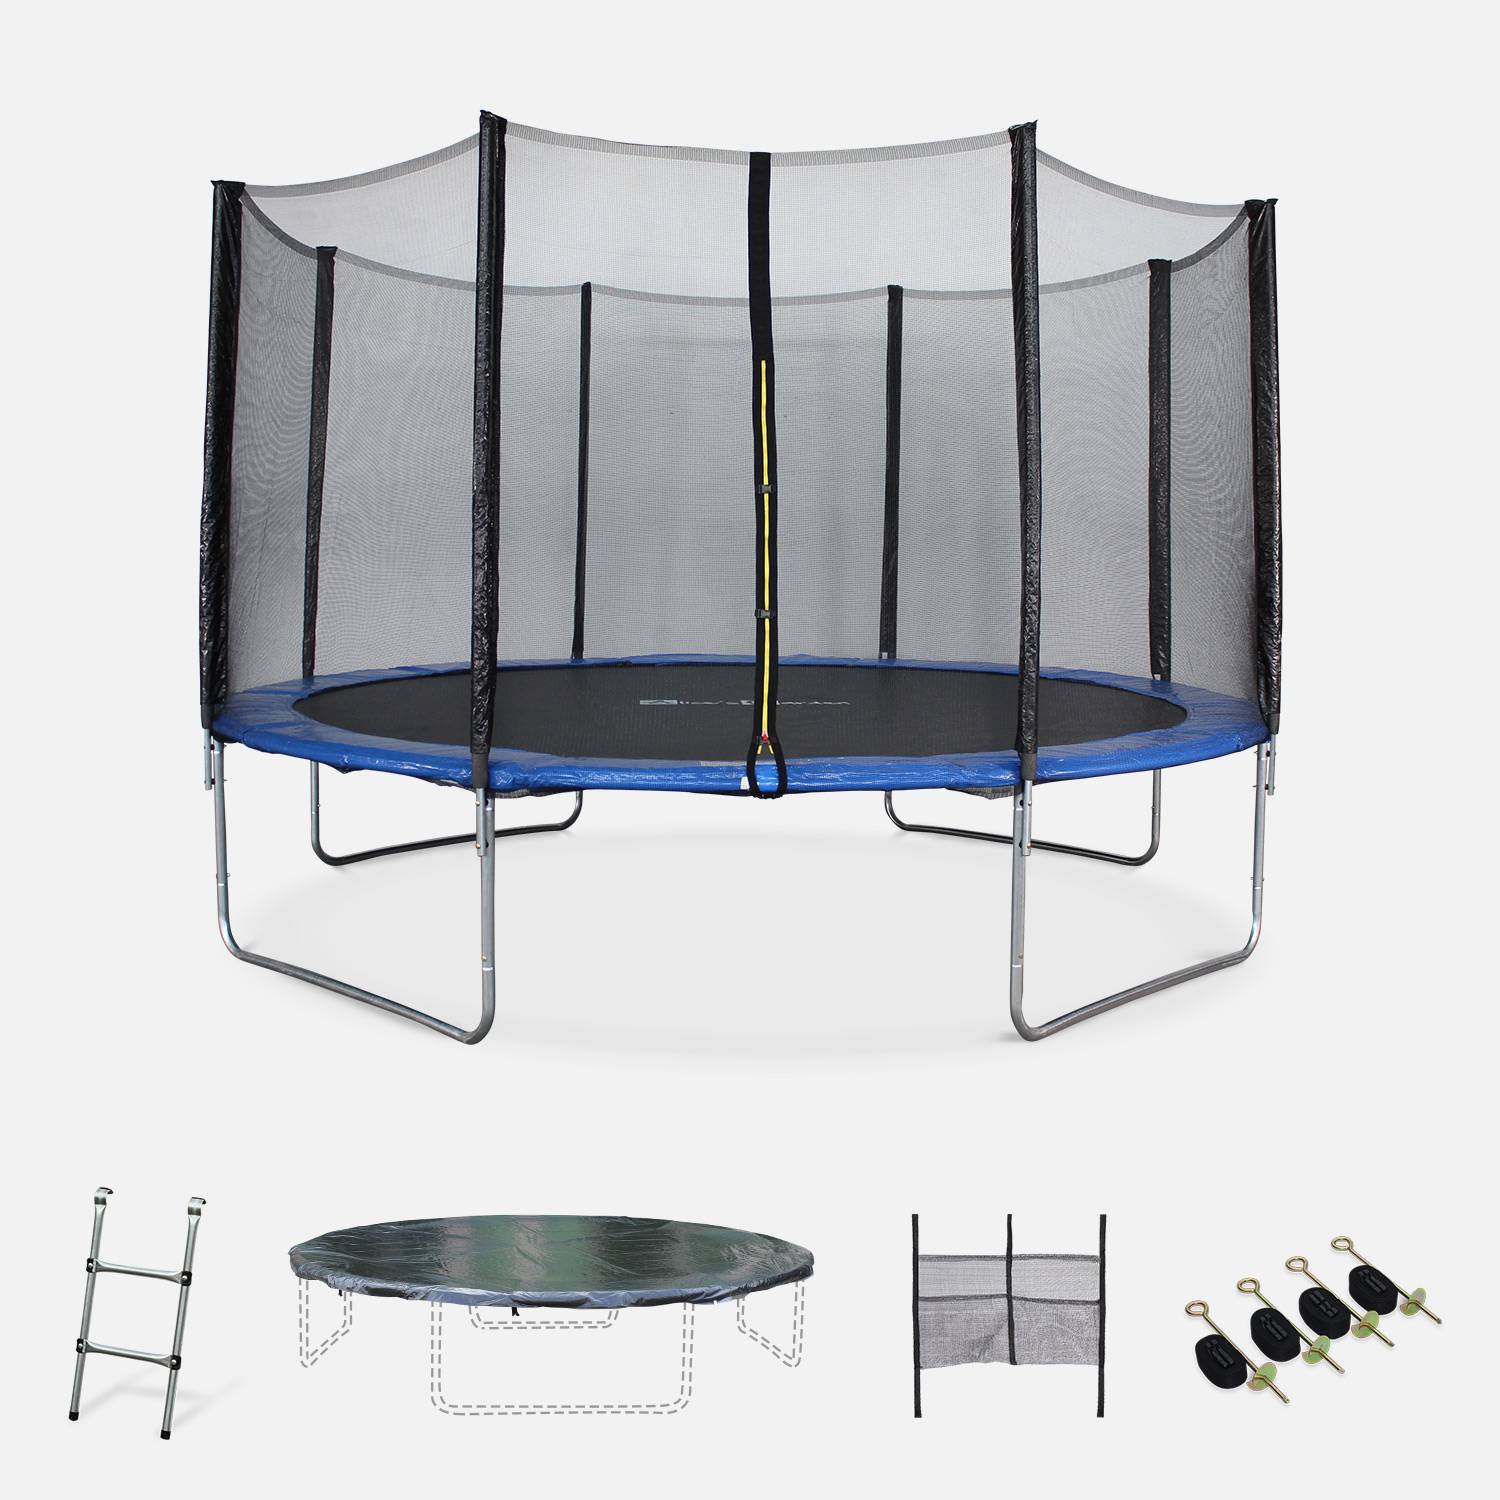 Ø13ft trampoline with accessory kit, shoe organiser, ladder, rain cover, safety net and anchoring kit Photo1